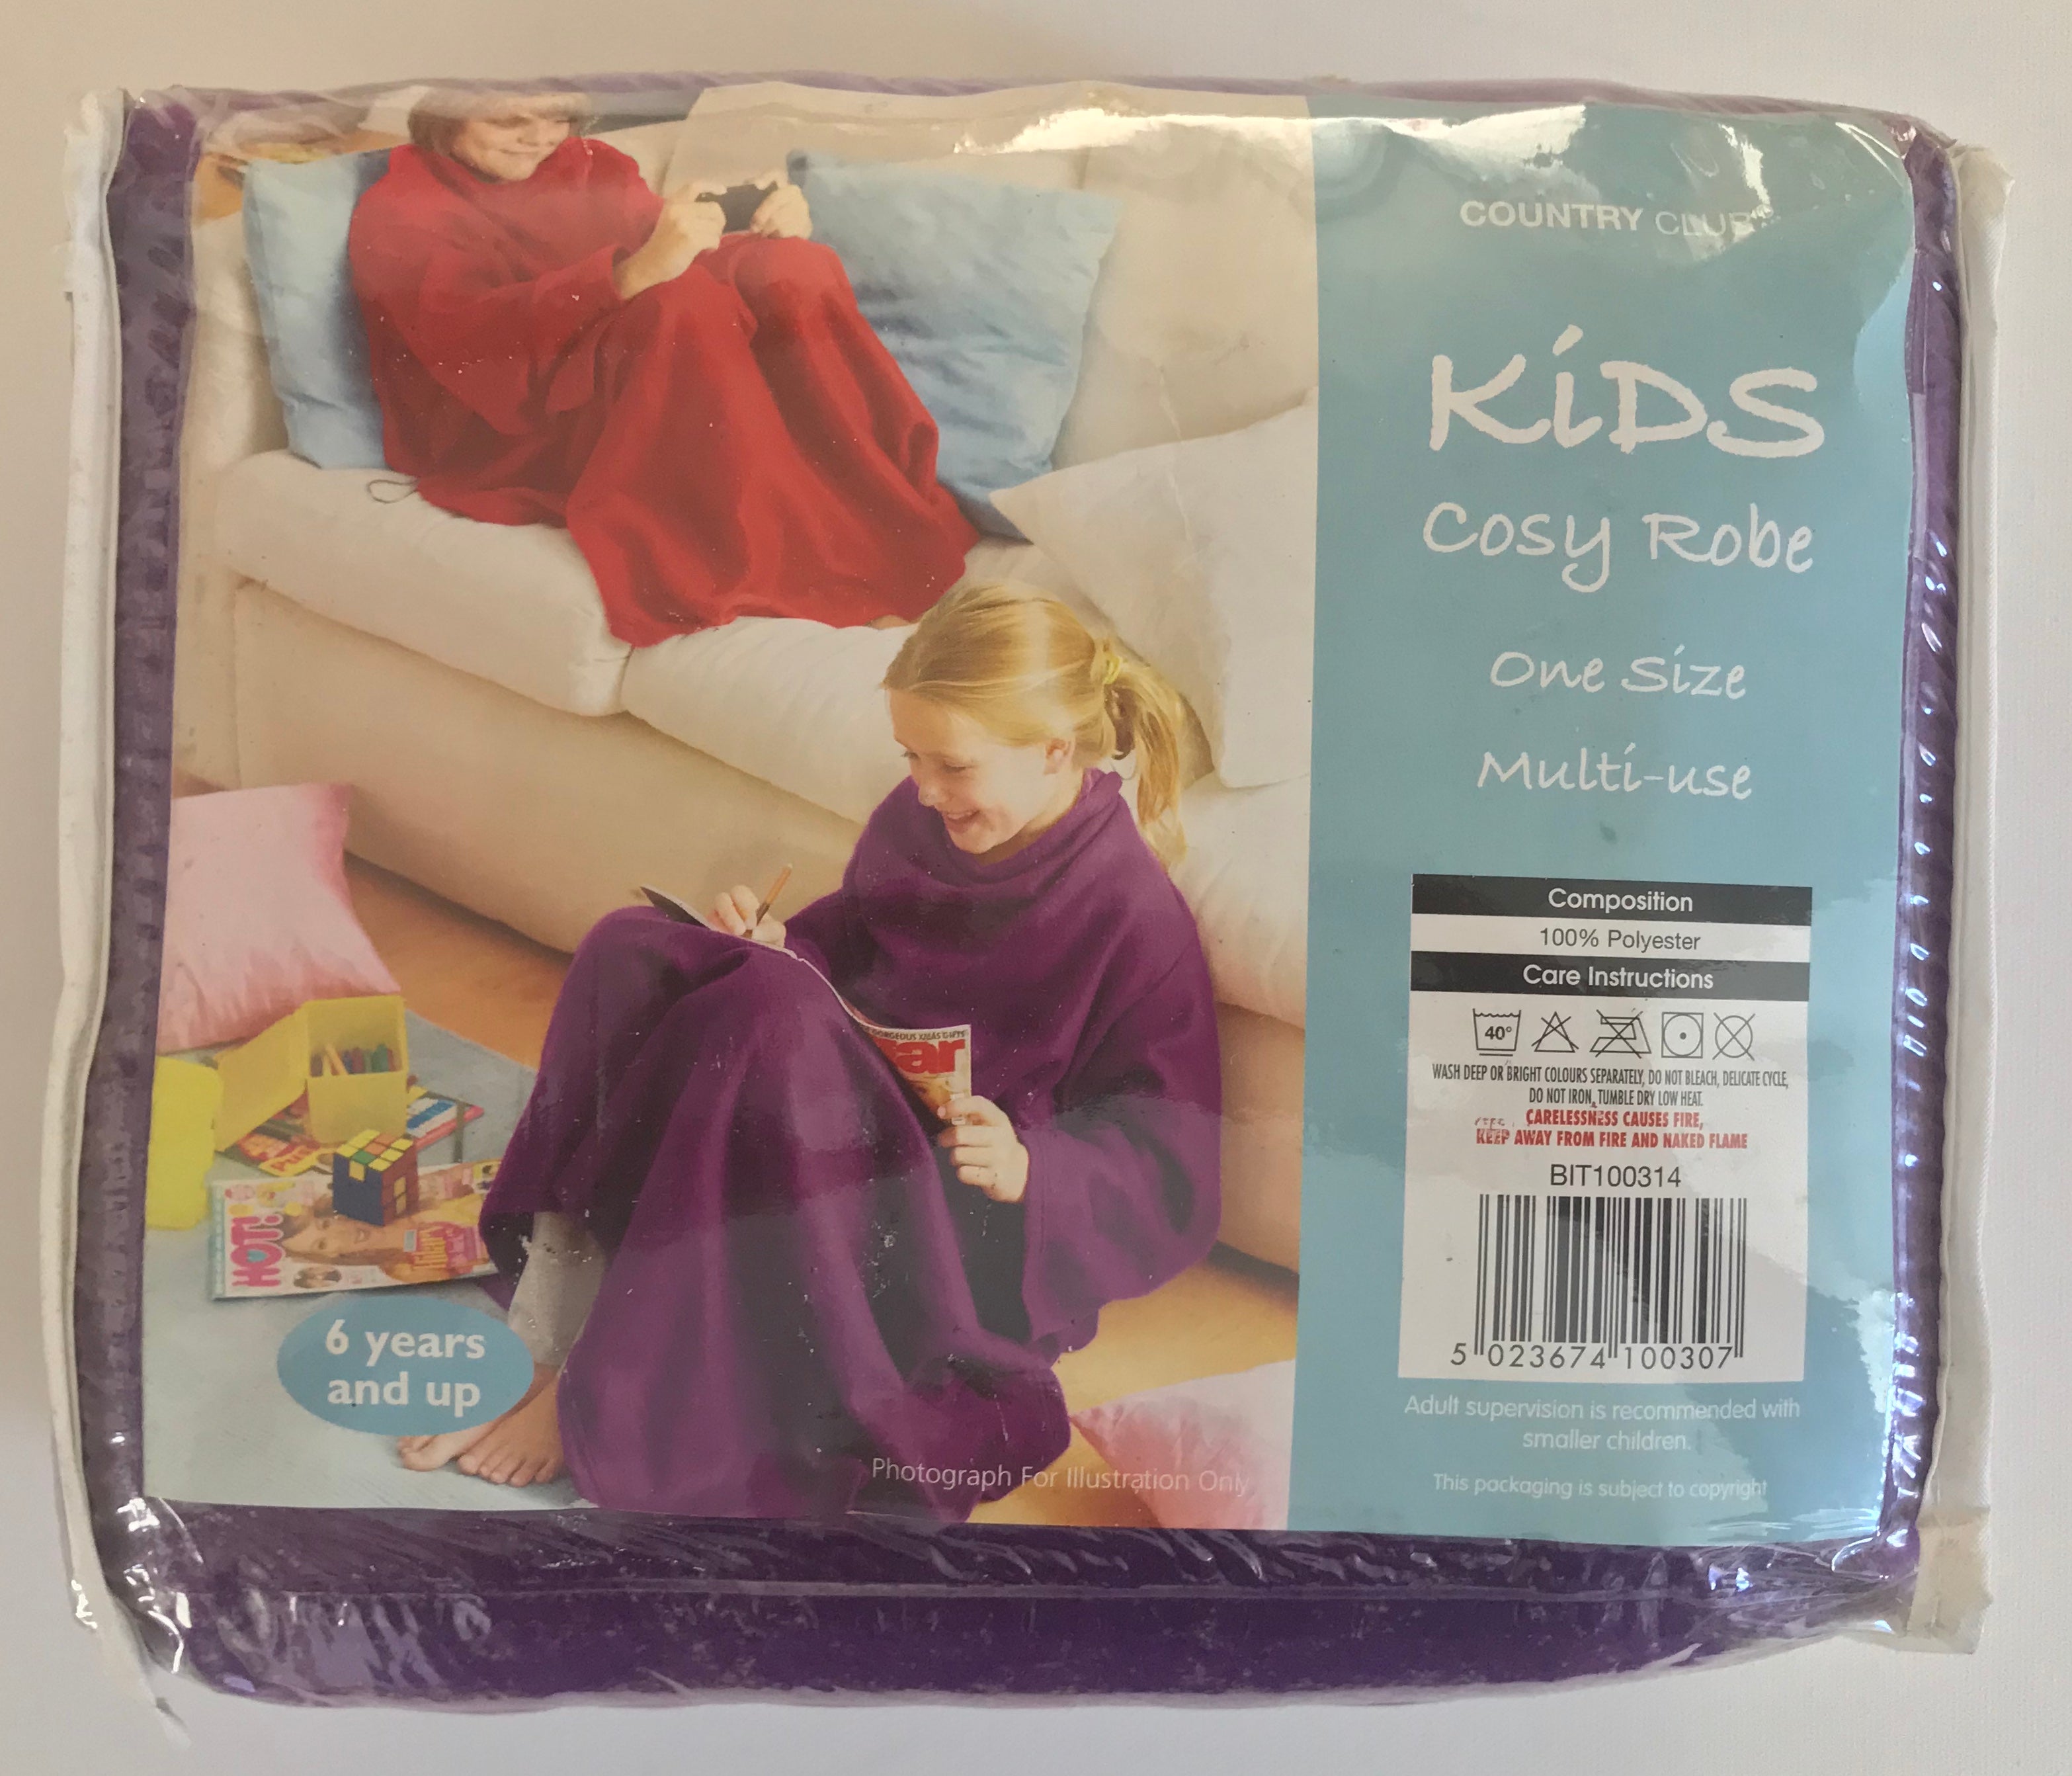 Kids, Cosy Robe, Multi-use, One Size - 4 Colours